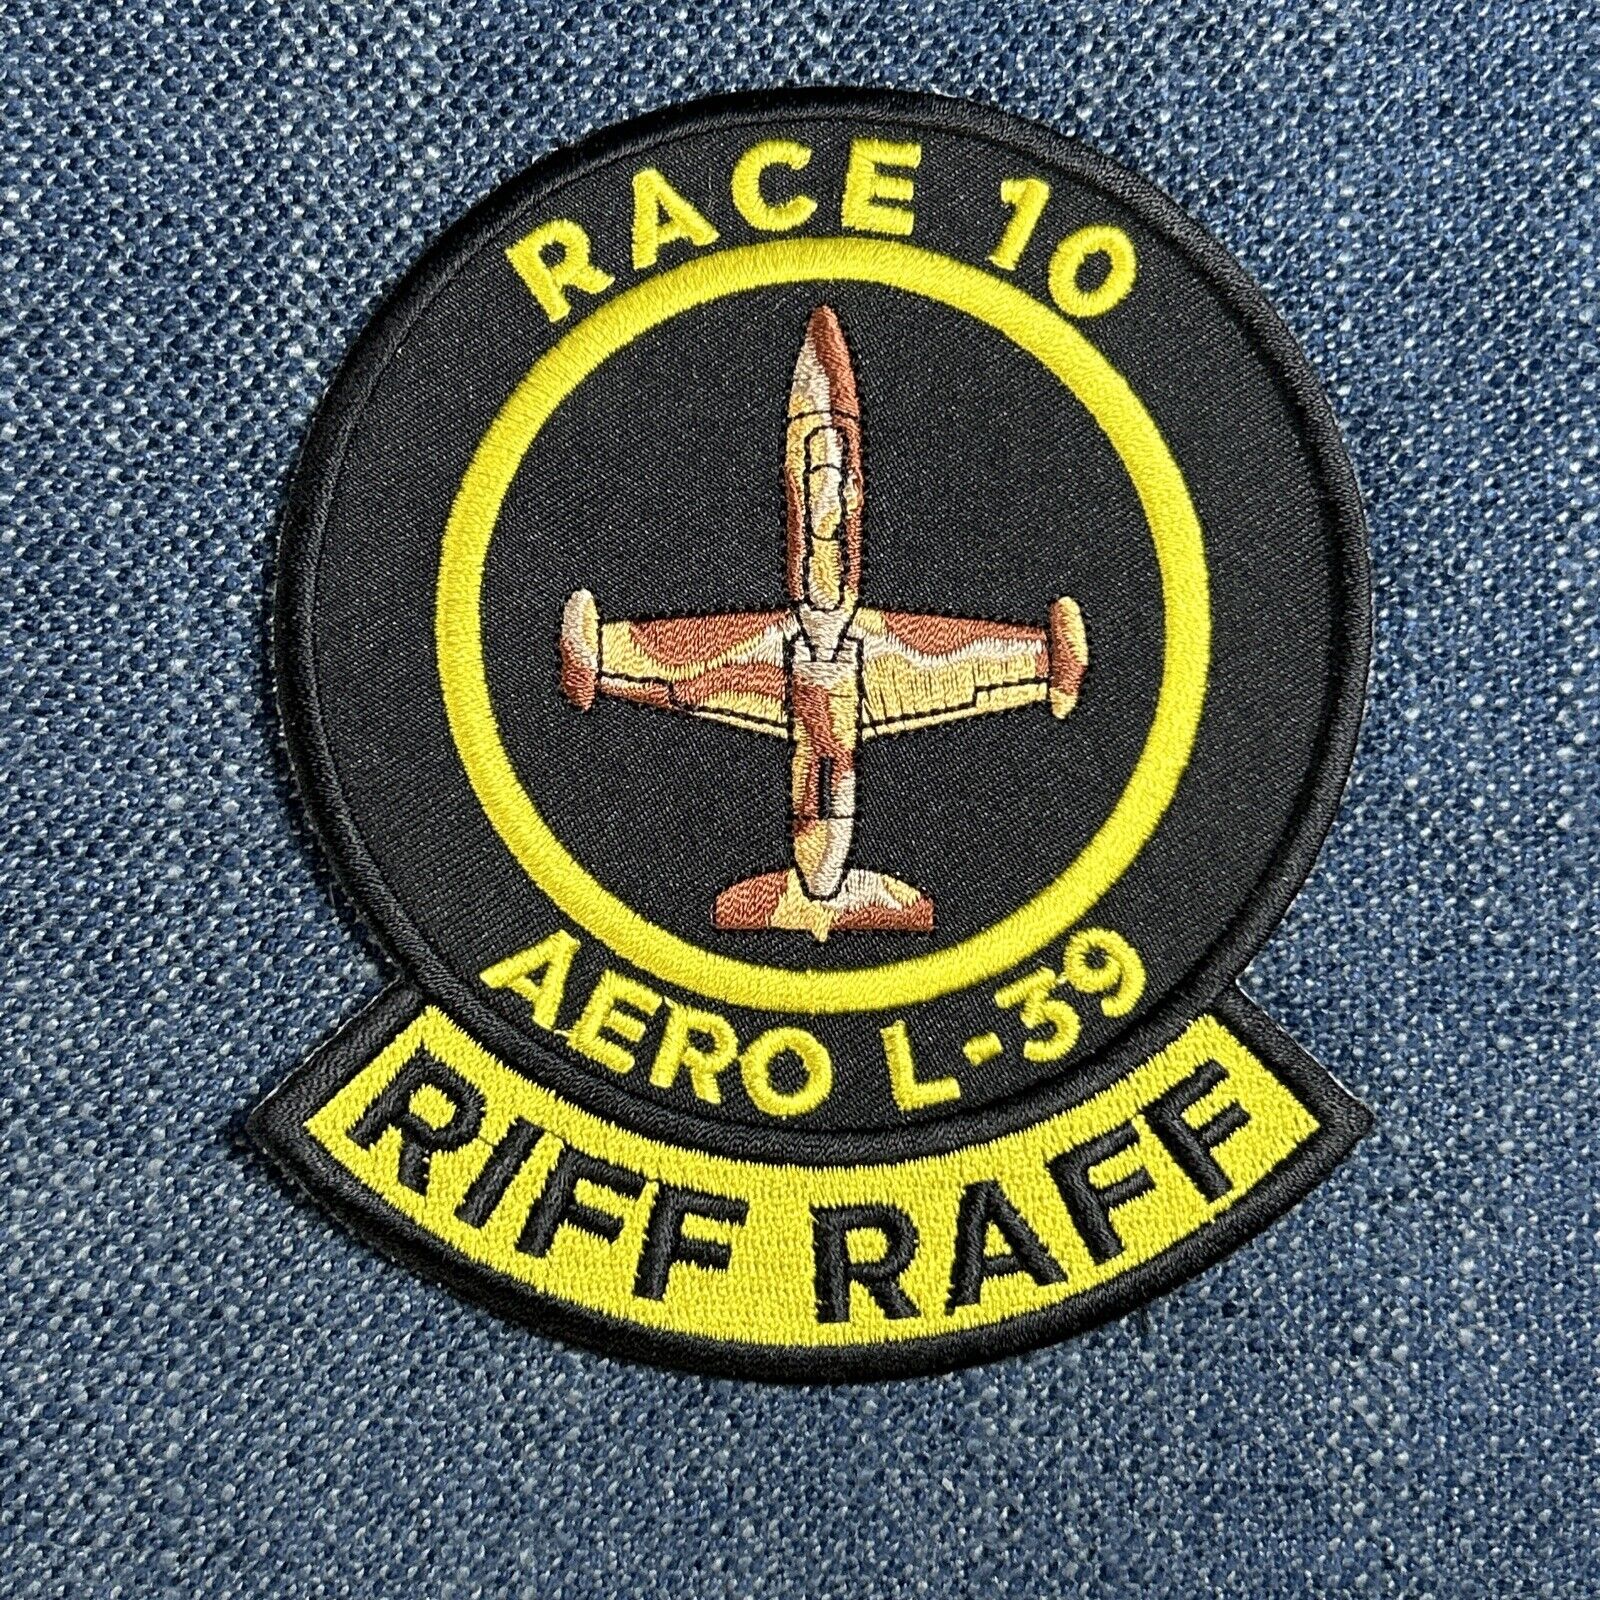 Airplane Patch Race 10 Aero L-39 Riff Raff Embroidered Sew on 4” X 5”